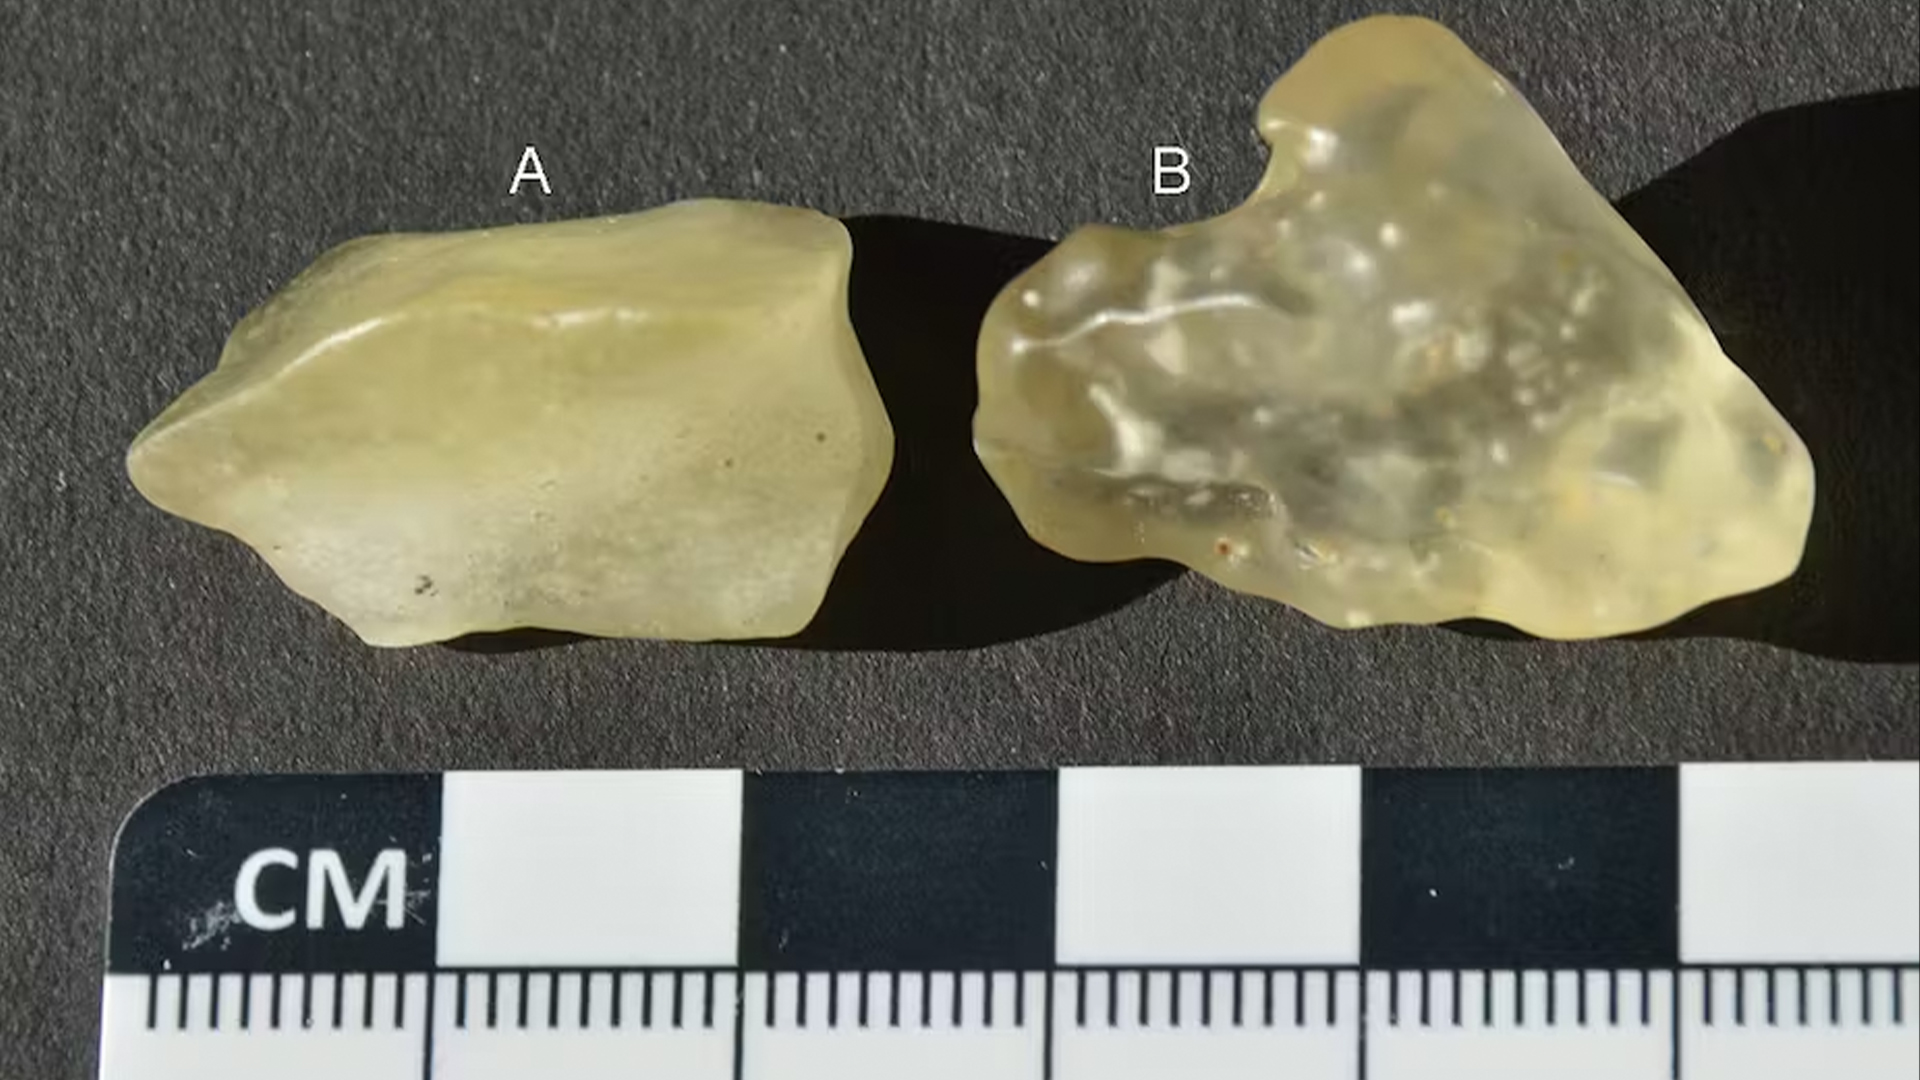 Strange yellow glass found in Libyan desert may have formed from lost meteor impact